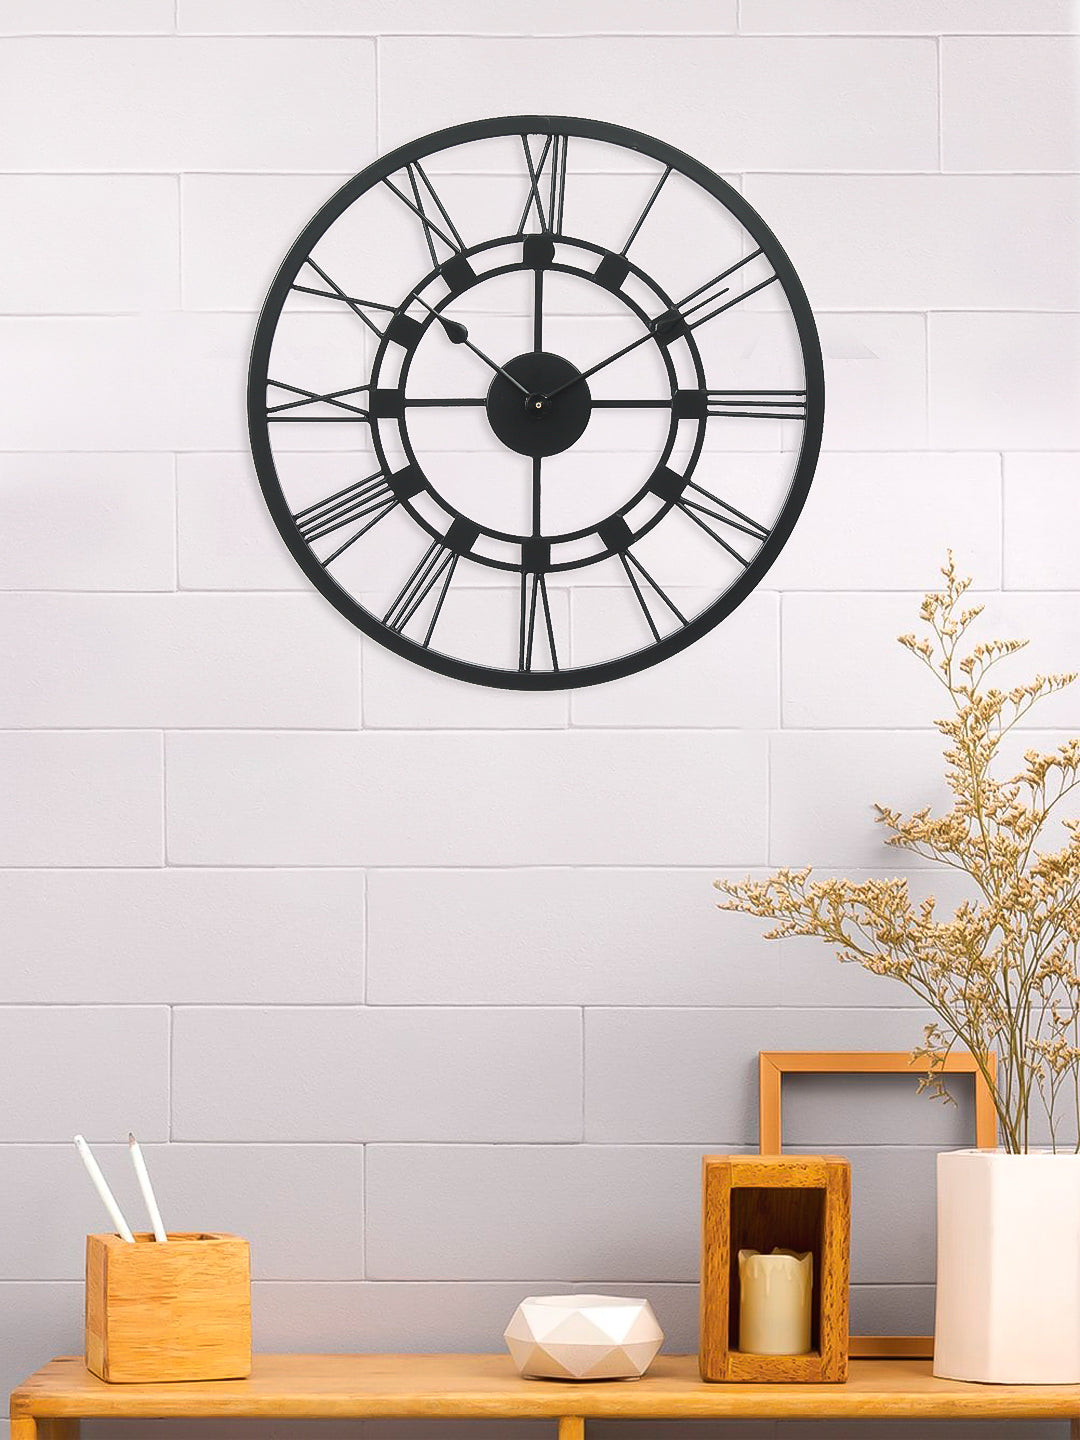 Black Iron Round Handcrafted Analog Roman Number Wall Clock Without Glass 1